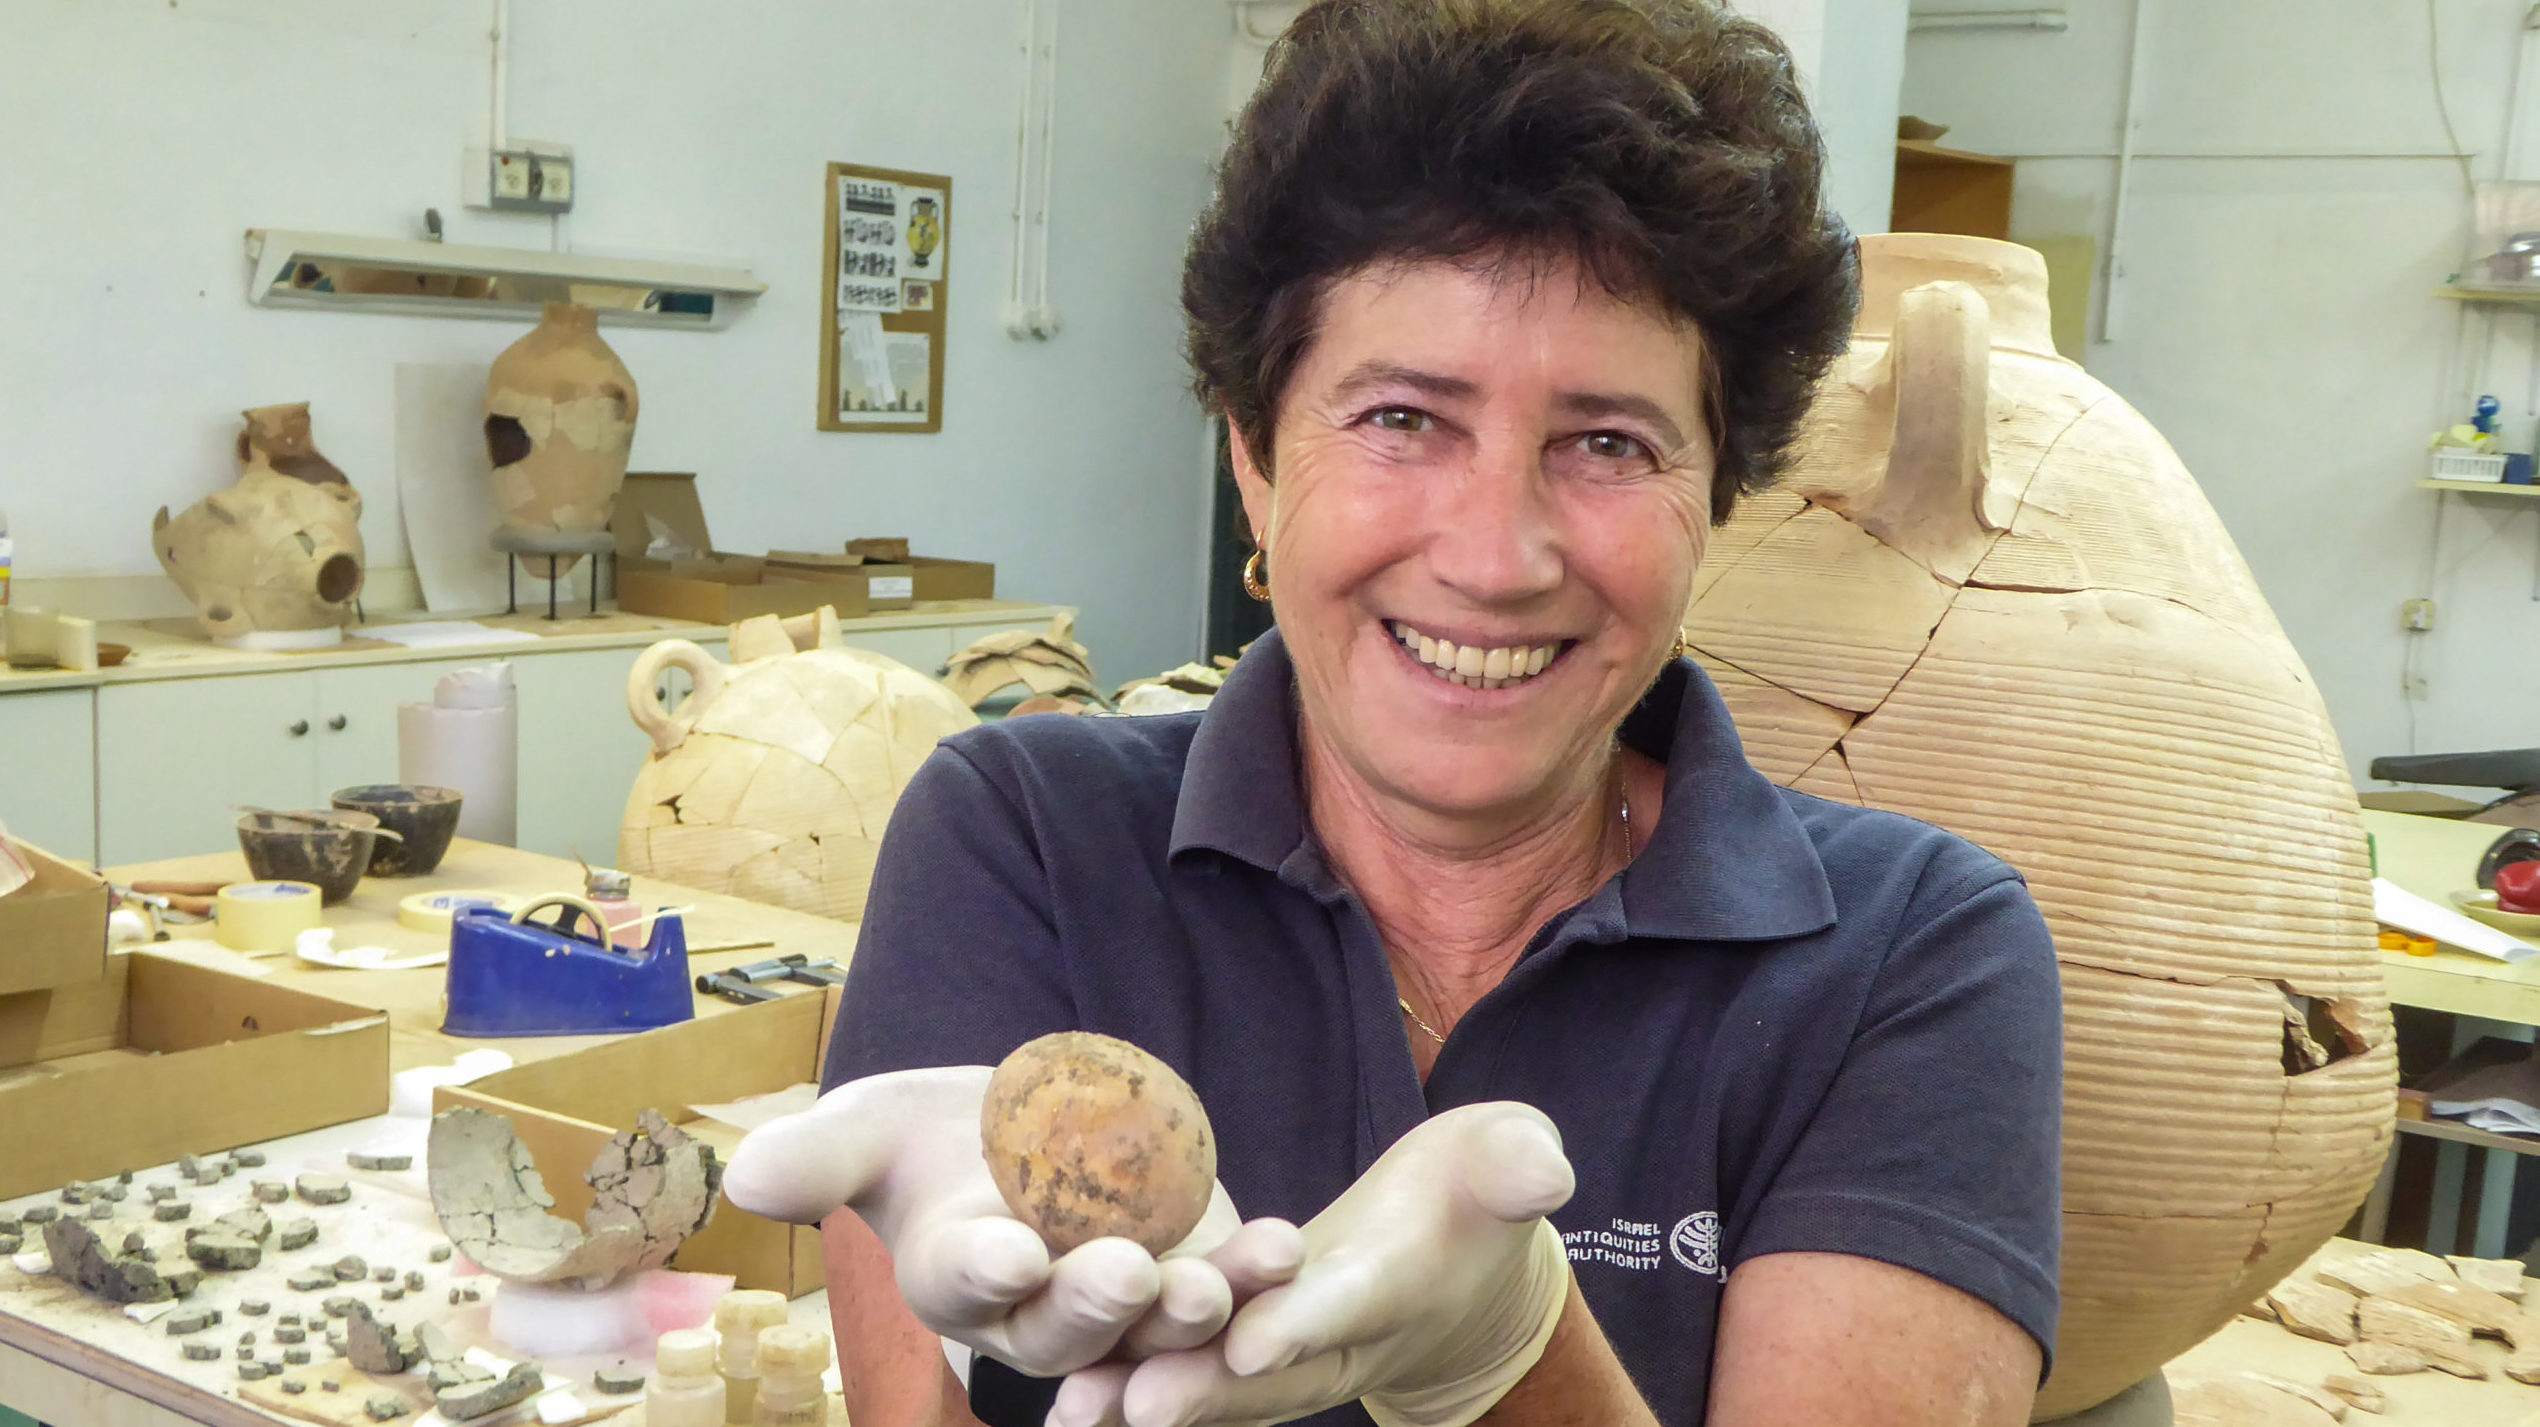 Egg-cellent Find: Israeli Archaeologists Unearth 1,000-Year-Old Egg